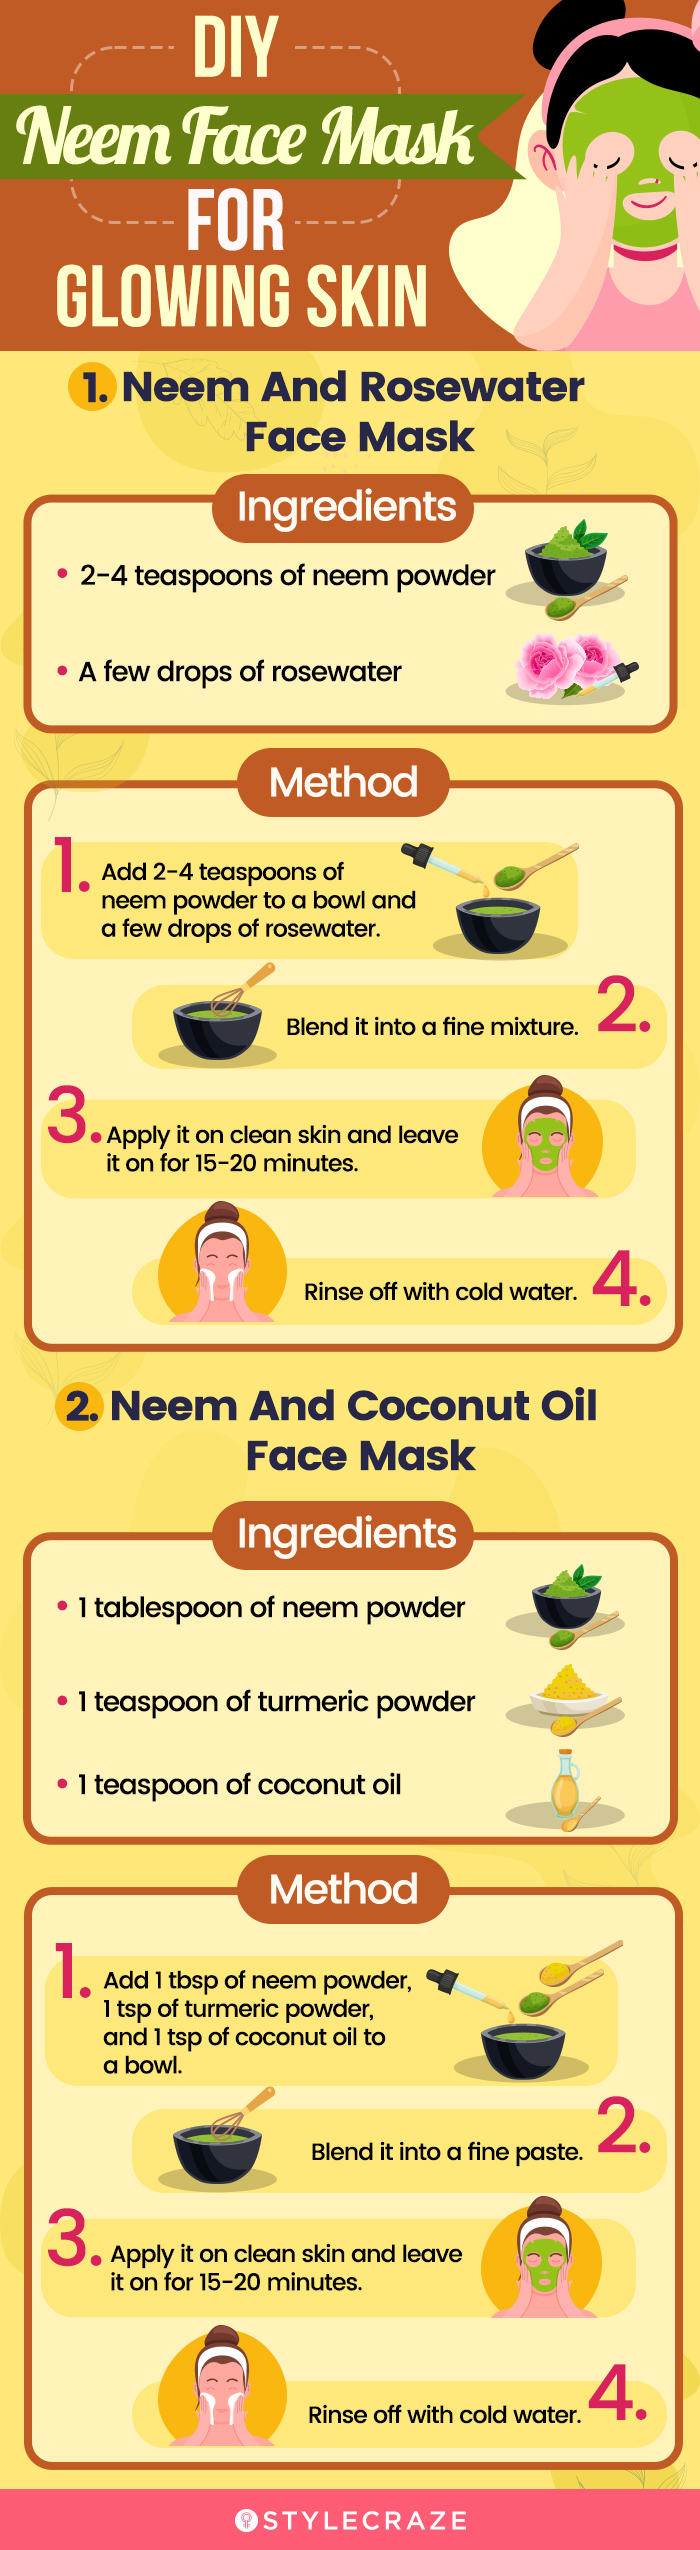 diy neem face mask for glowing skin (infographic)